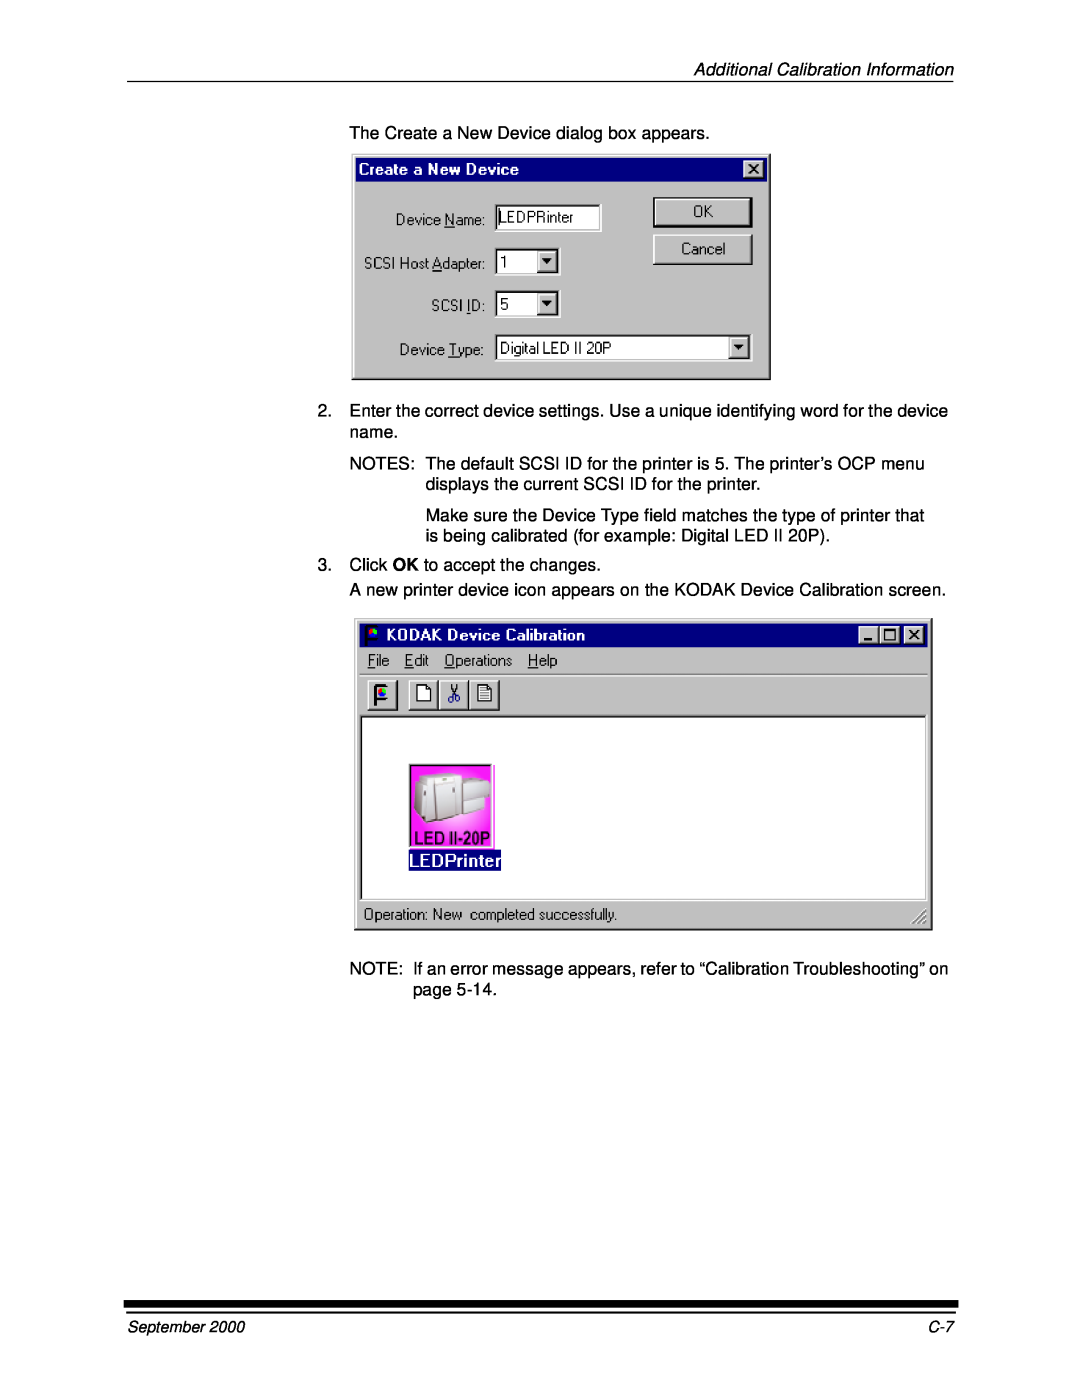 Kodak 20R manual Additional Calibration Information, The Create a New Device dialog box appears 